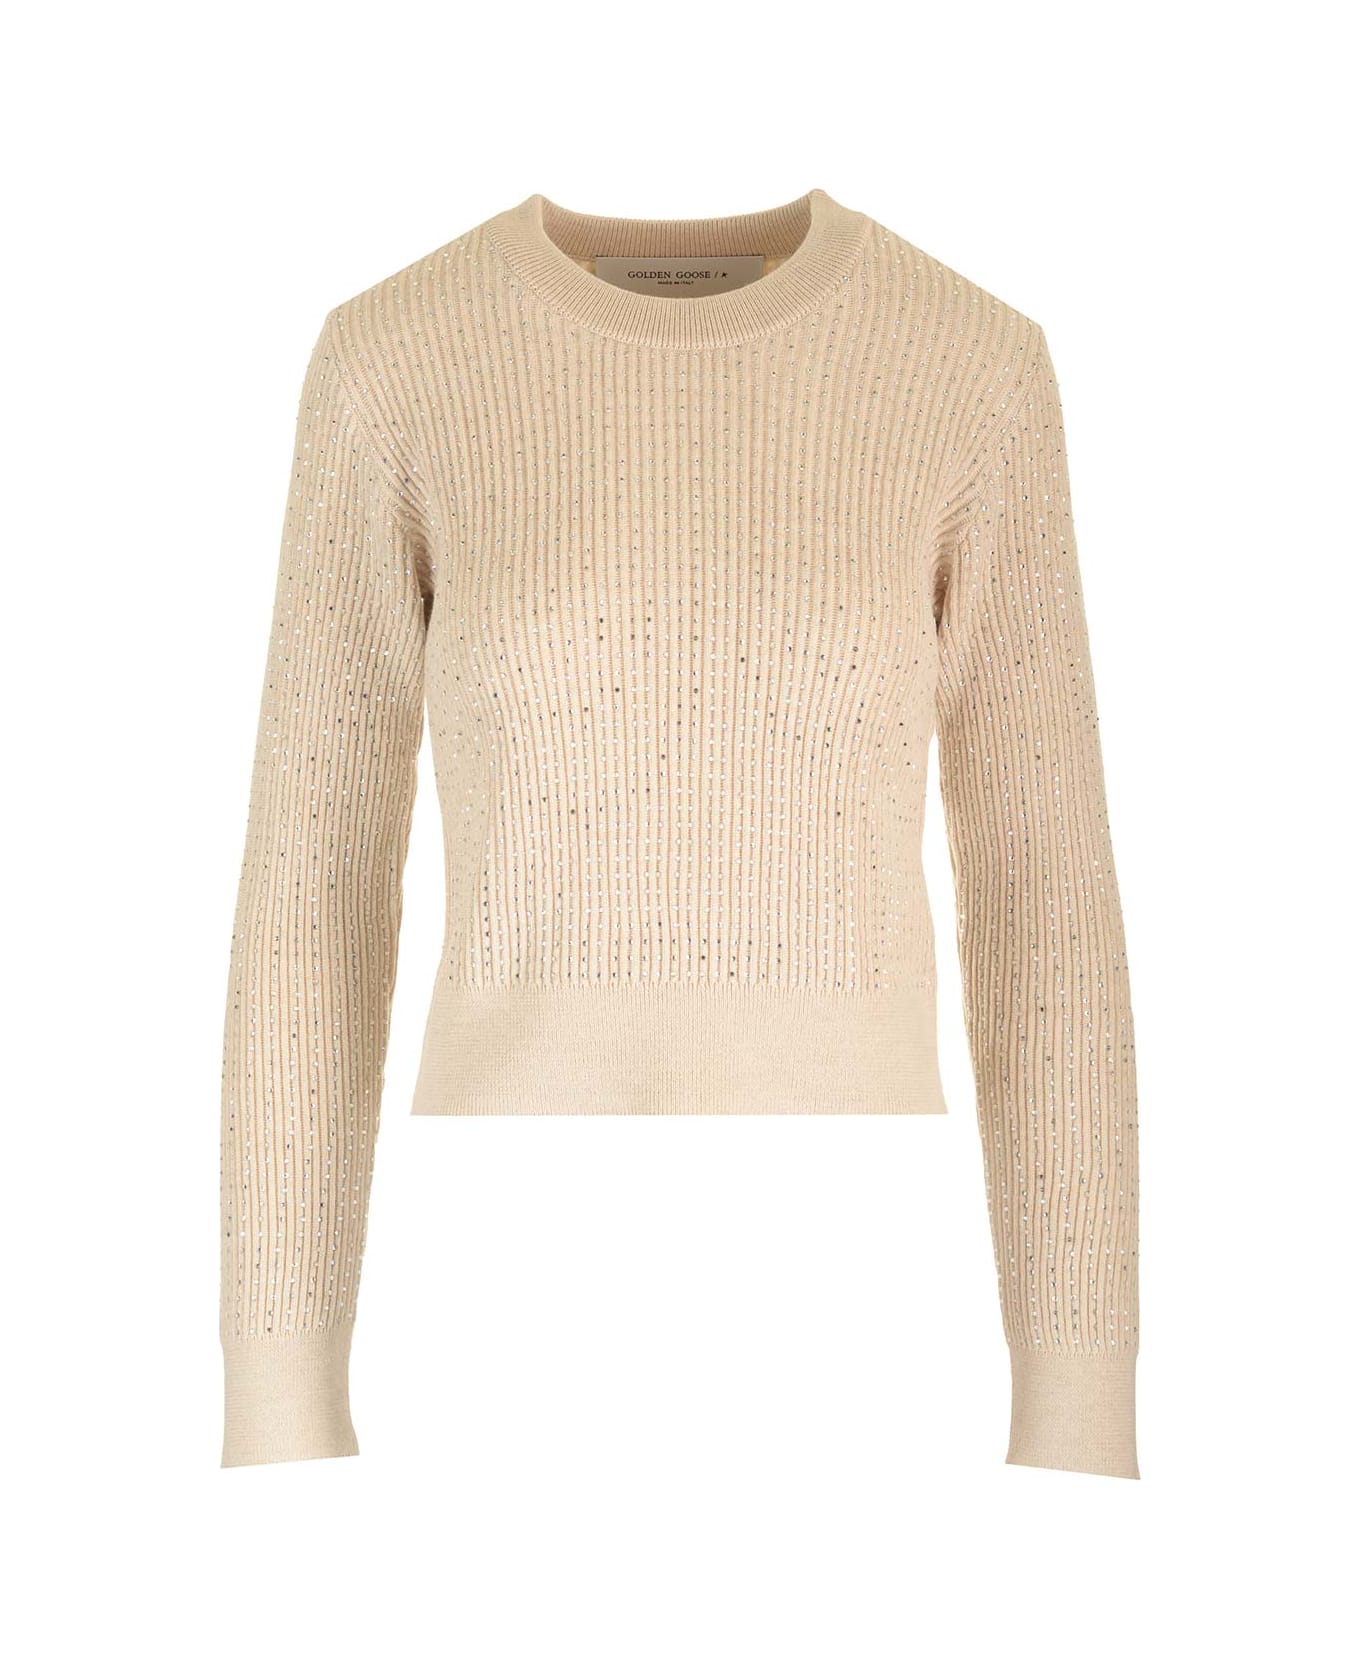 Golden Goose Ribbed Wool Sweater - Nude